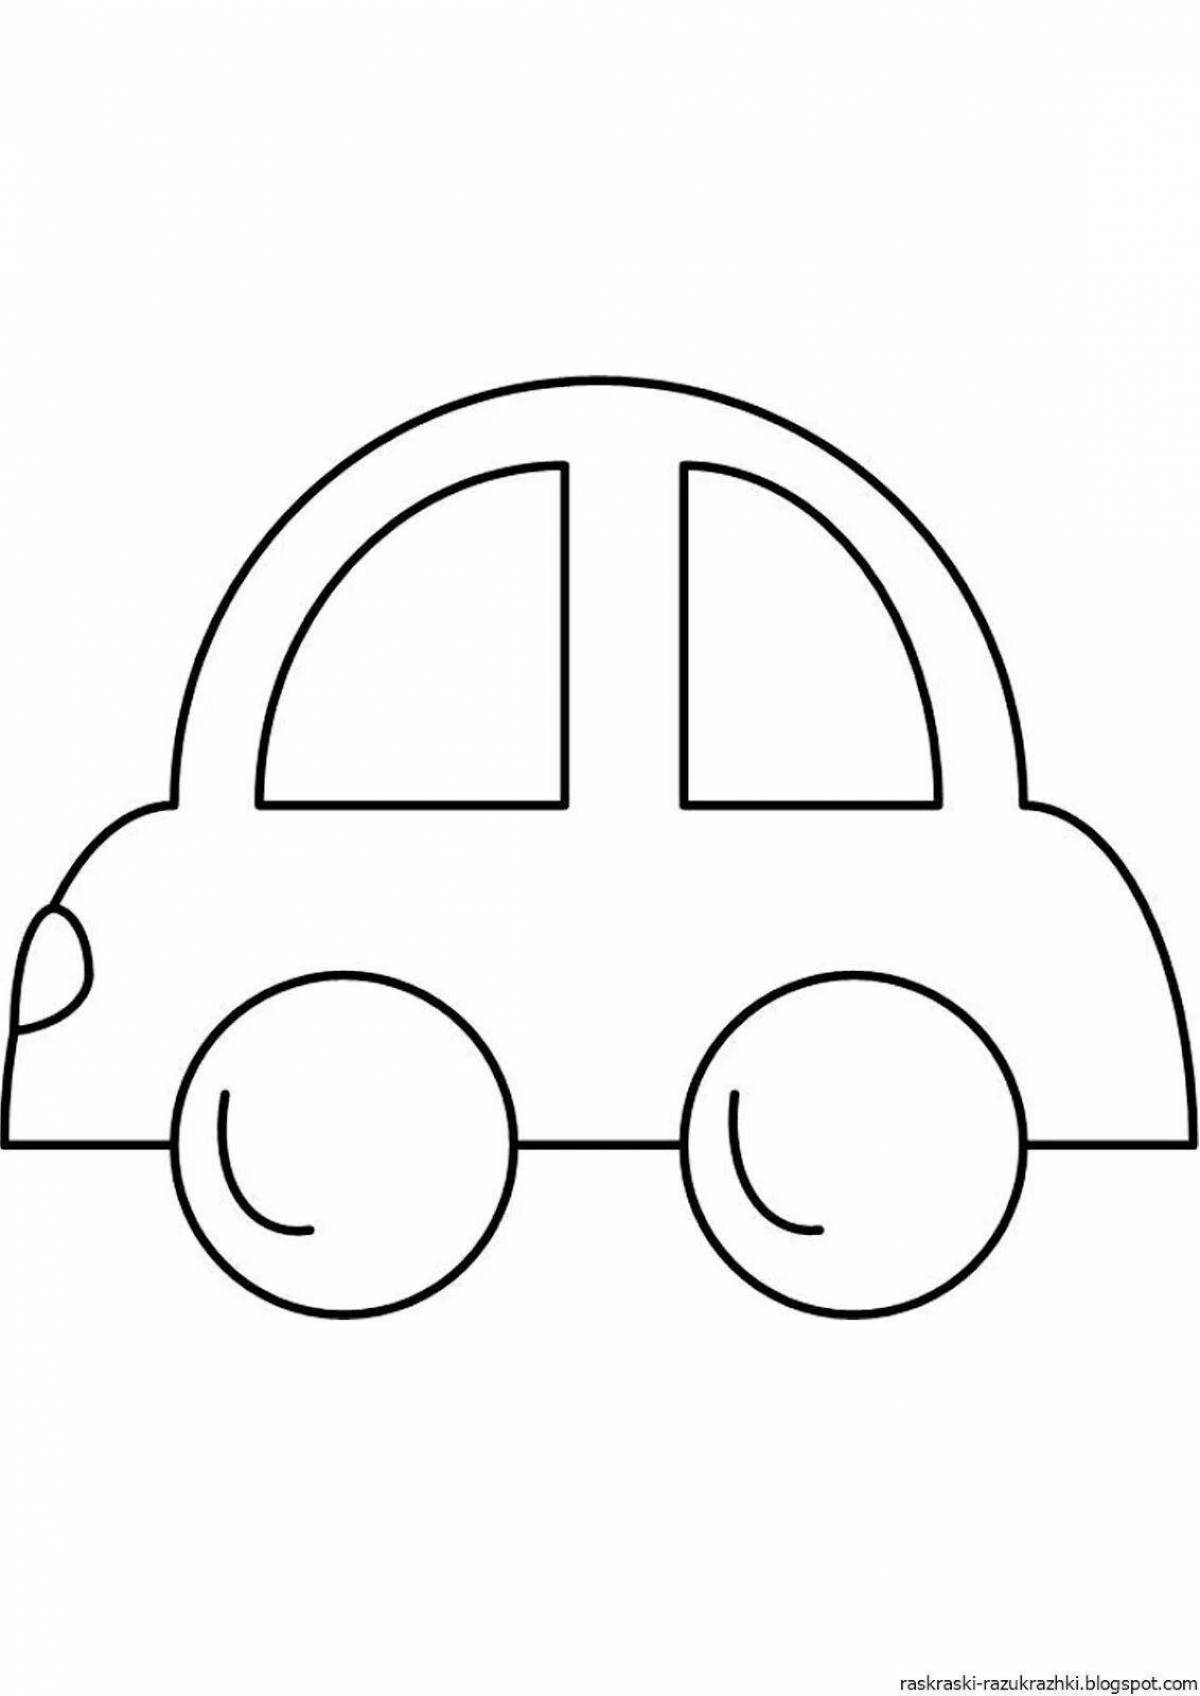 Color-frenzy cars coloring page for kids 2-3 years old